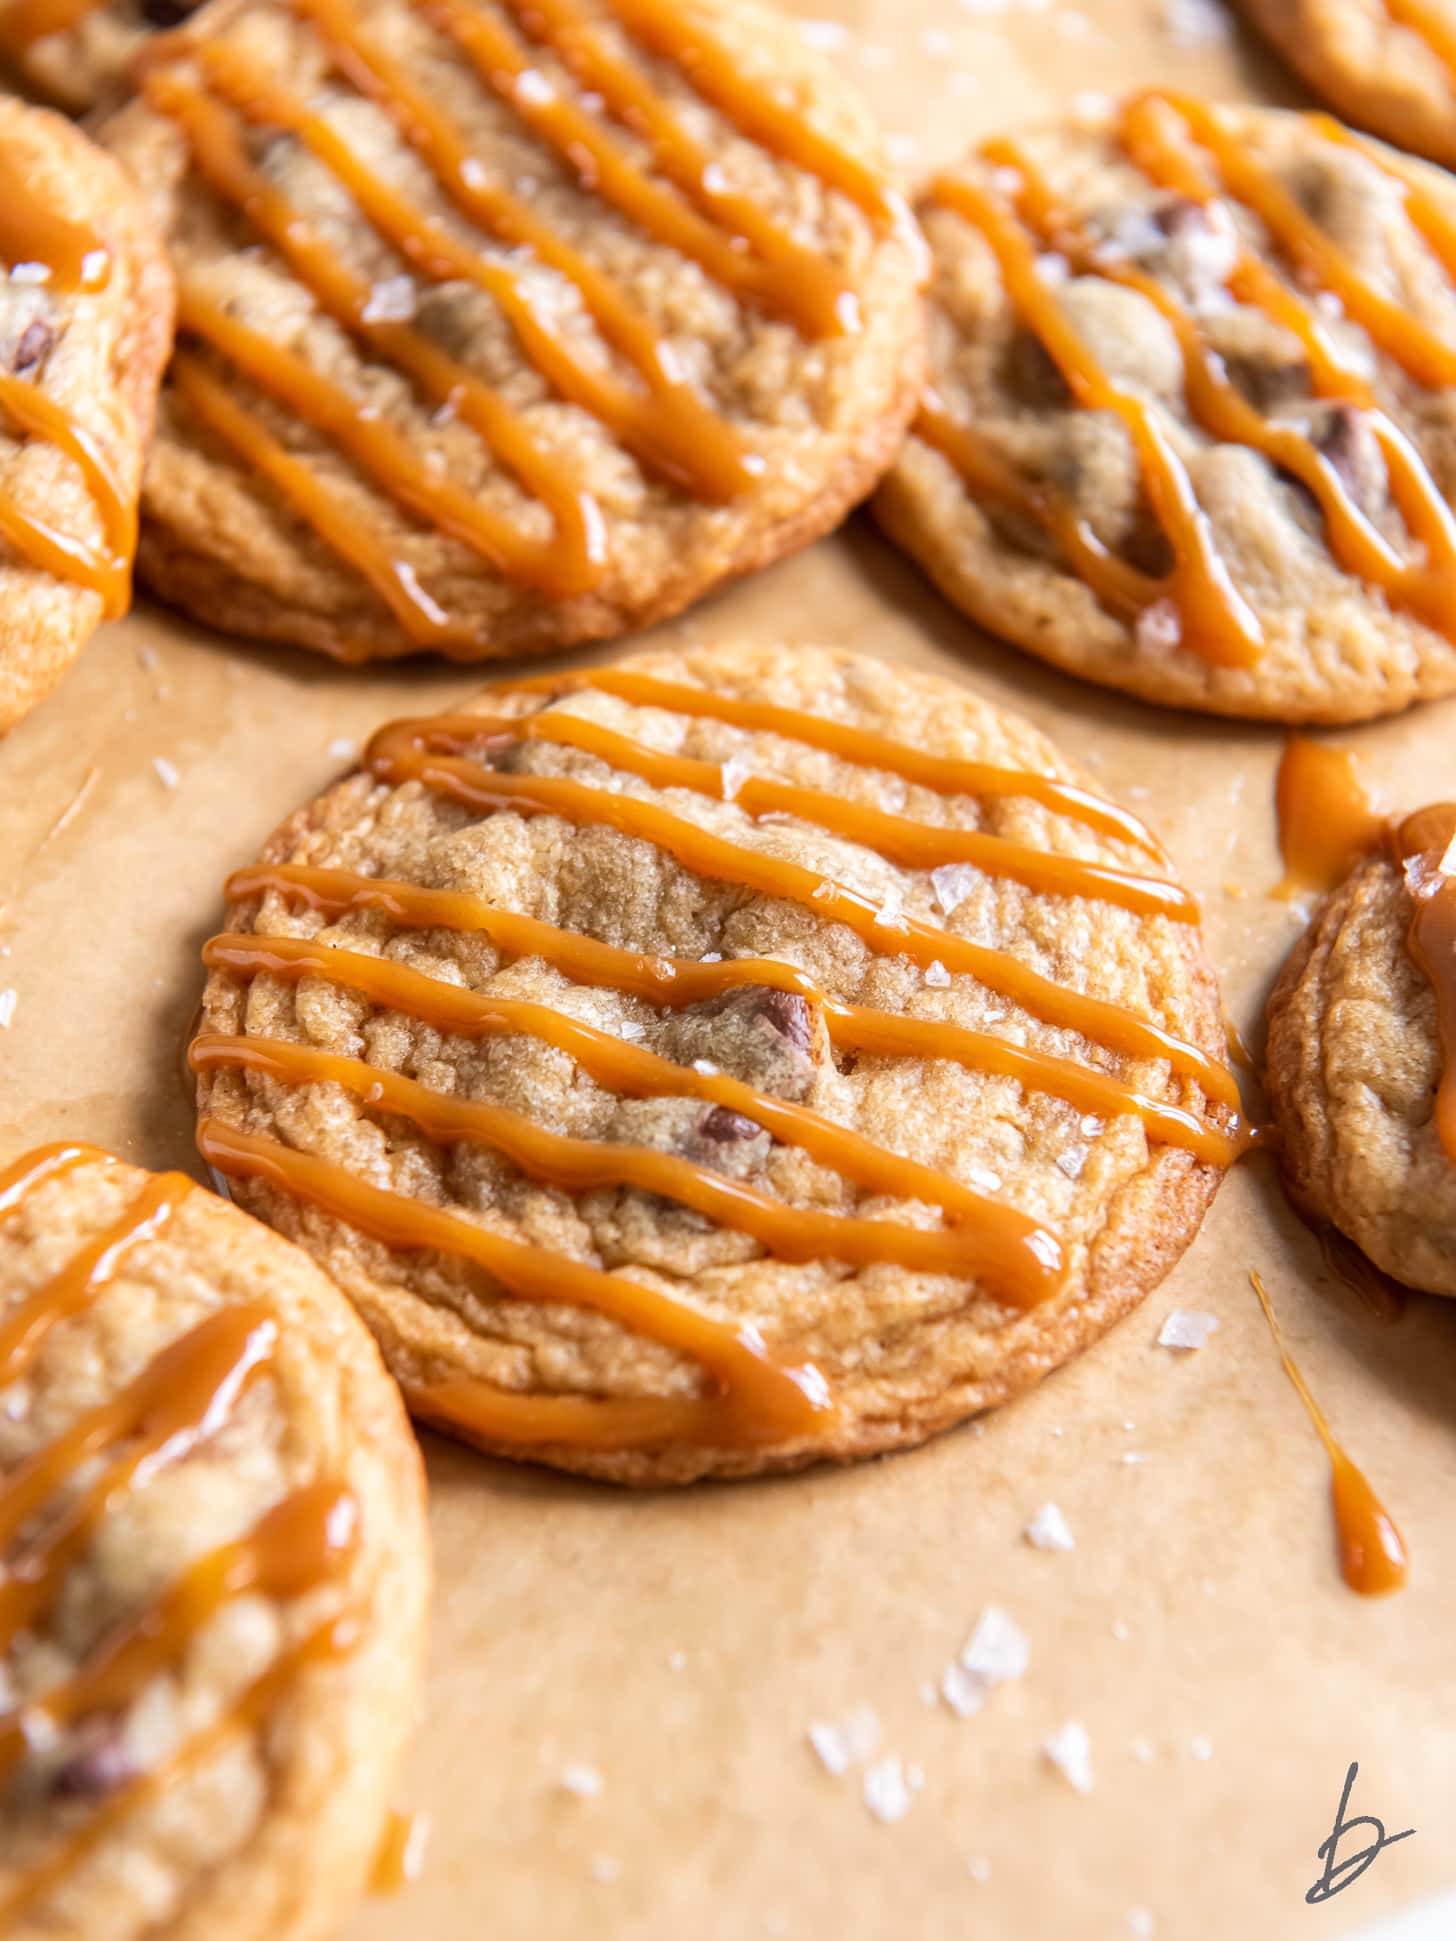 chocolate chip caramel cookie with caramel drizzled on top.